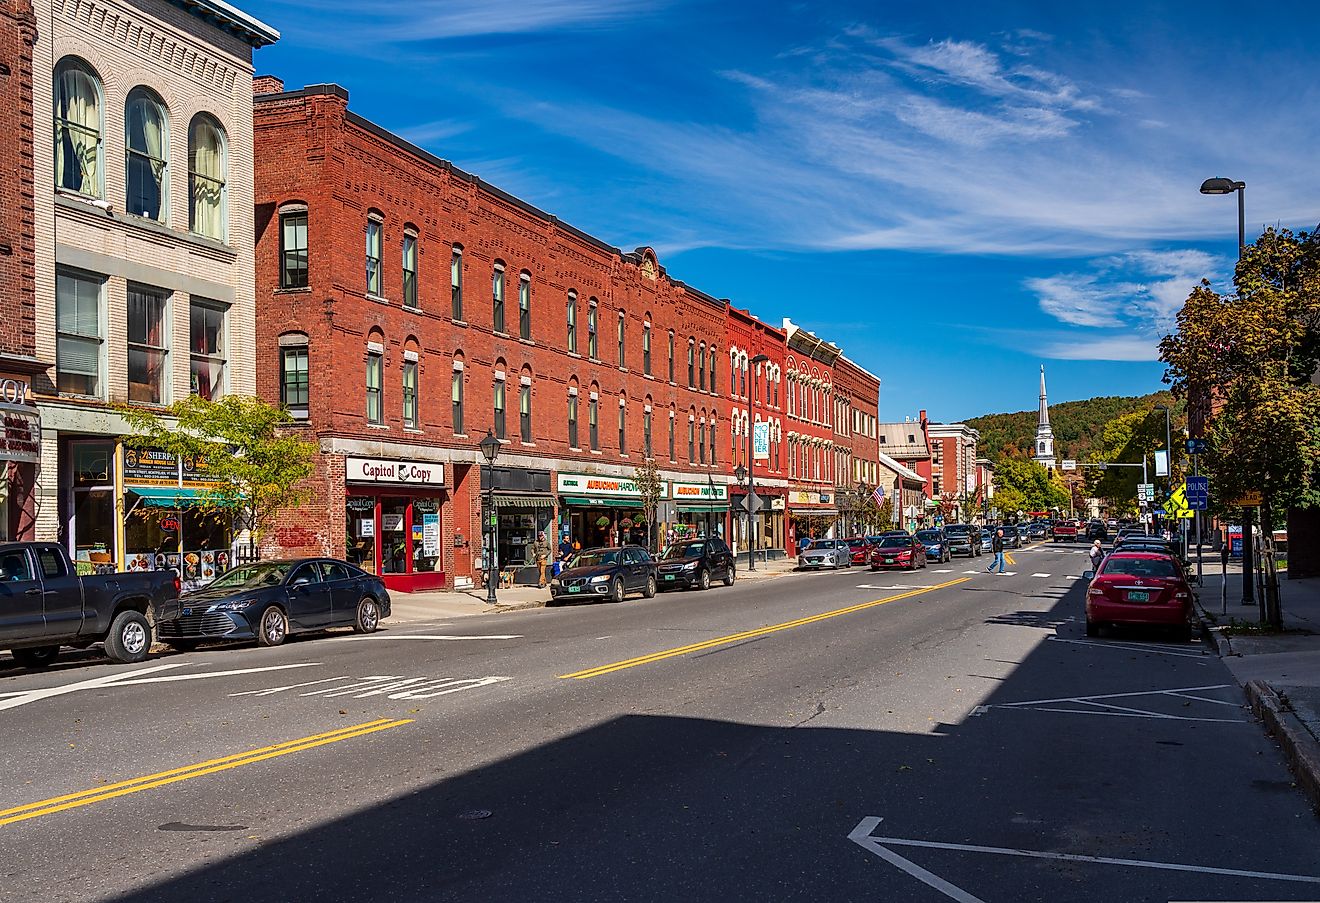 Montpelier, Vermont: Main street of Montpelier in the fall, via BackyardProduction / iStock.com